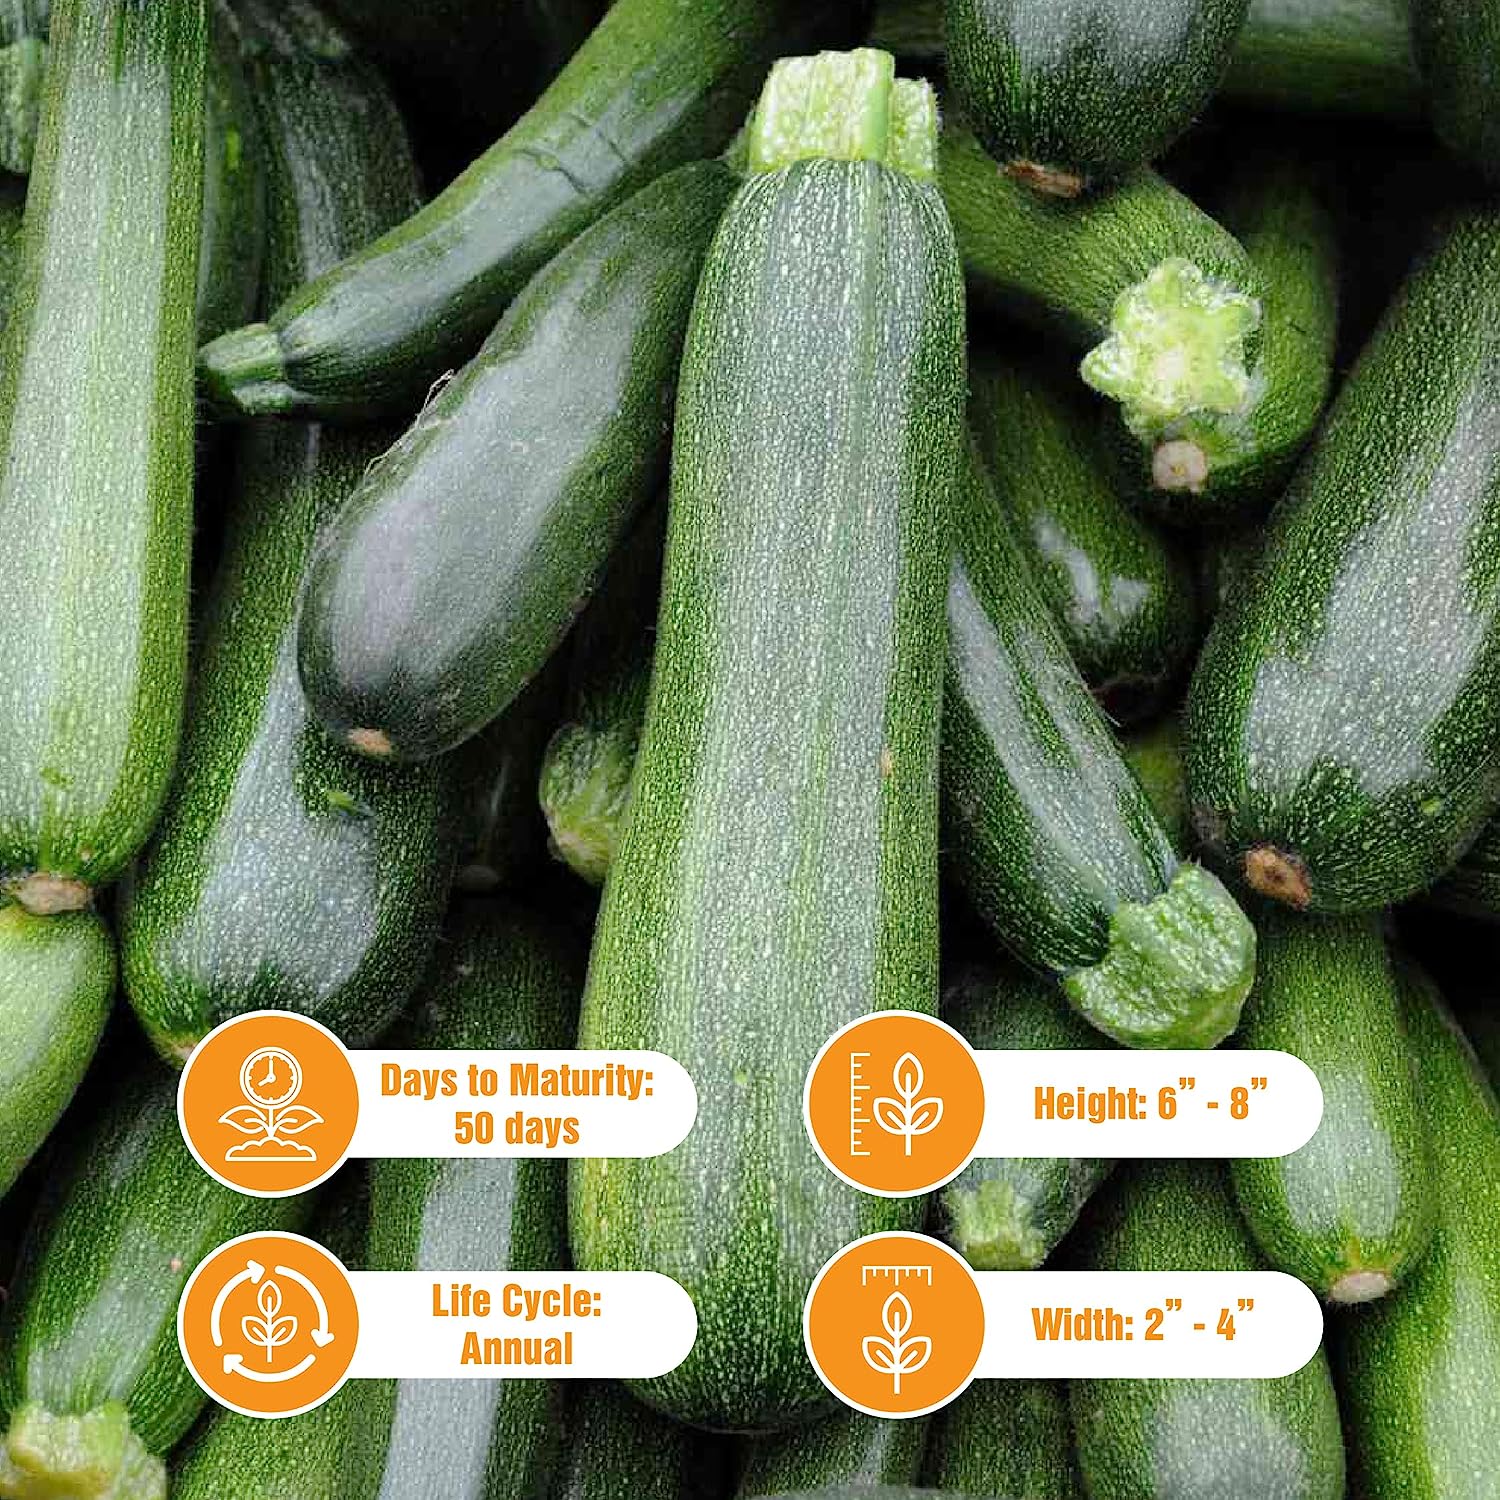 25 Black Zucchini Seeds for Gardening – Non GMO Heirloom Garden Plants, Seeds & Bulbs – Plant Seeds Zucchini Organic Fresh – Organic Zucchini Fresh Seeds – Seeds for Planting Vegetables and Fruits